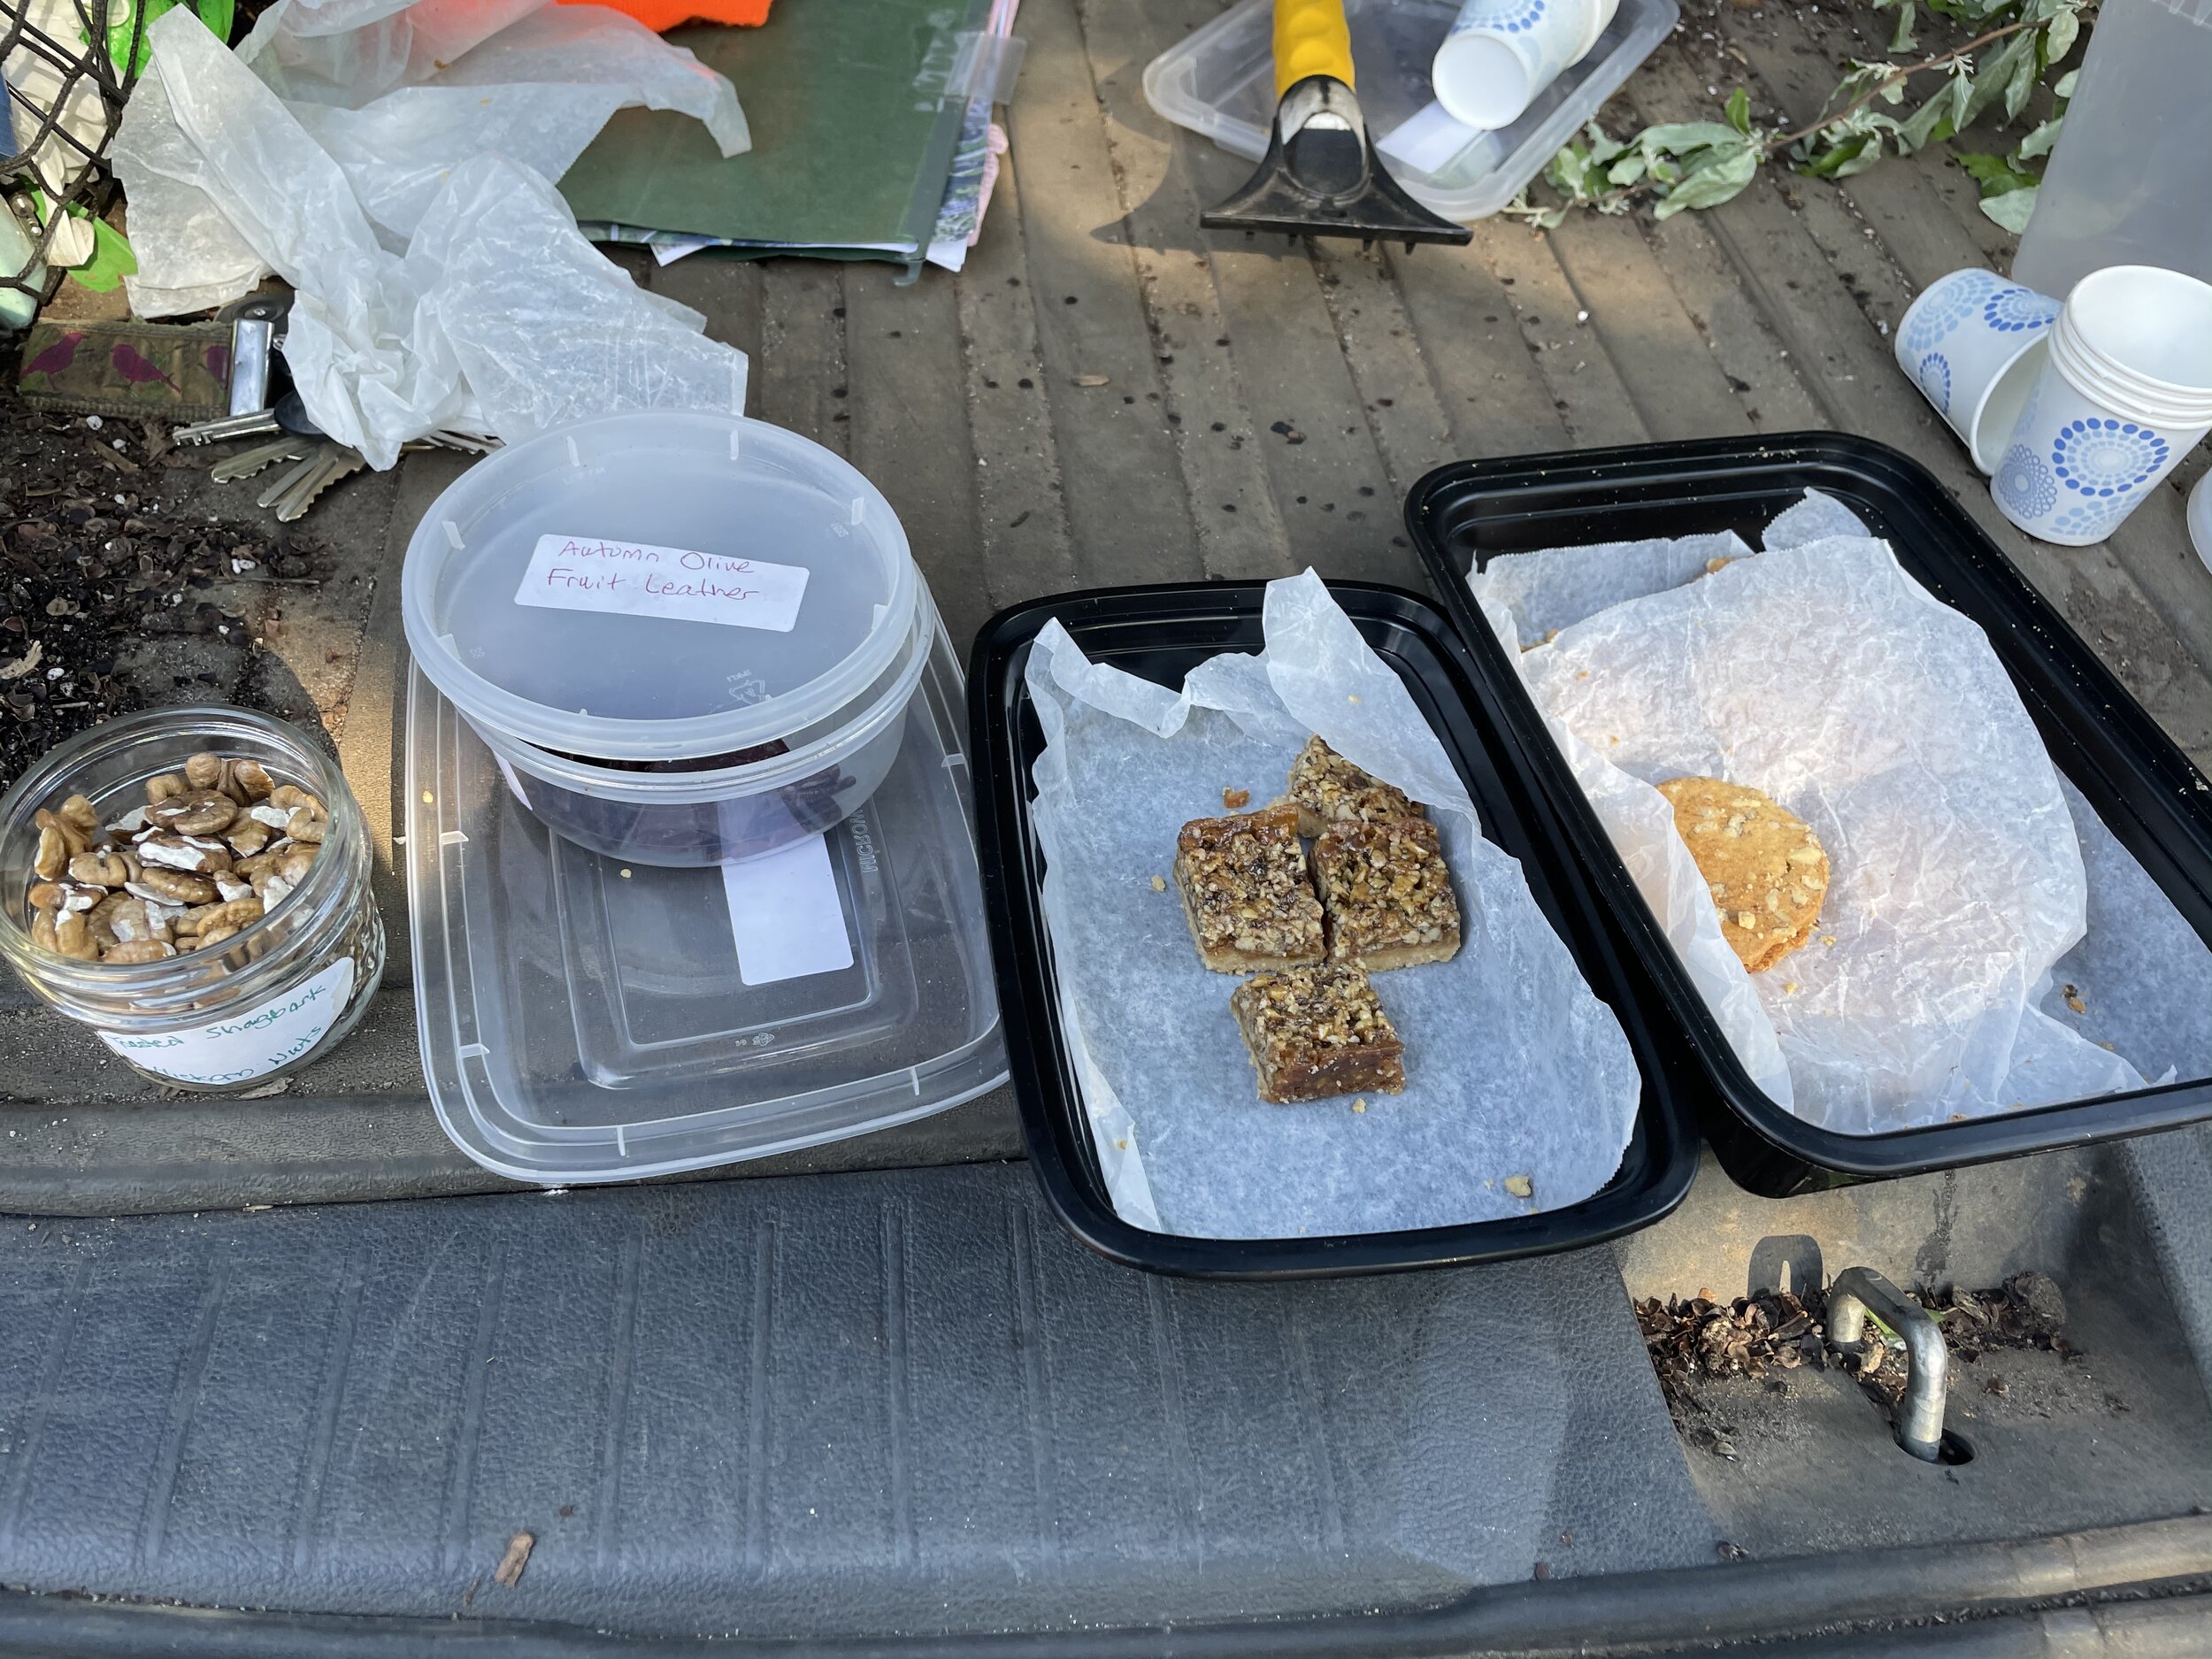  He also brought some delicious Honey/Black Walnut bars and Autumn Olive fruit leather and some Sumac “Lemonade” to wash it all down. What a great way to end such a wonderful class learning about some of the bounty that surrounds us. 